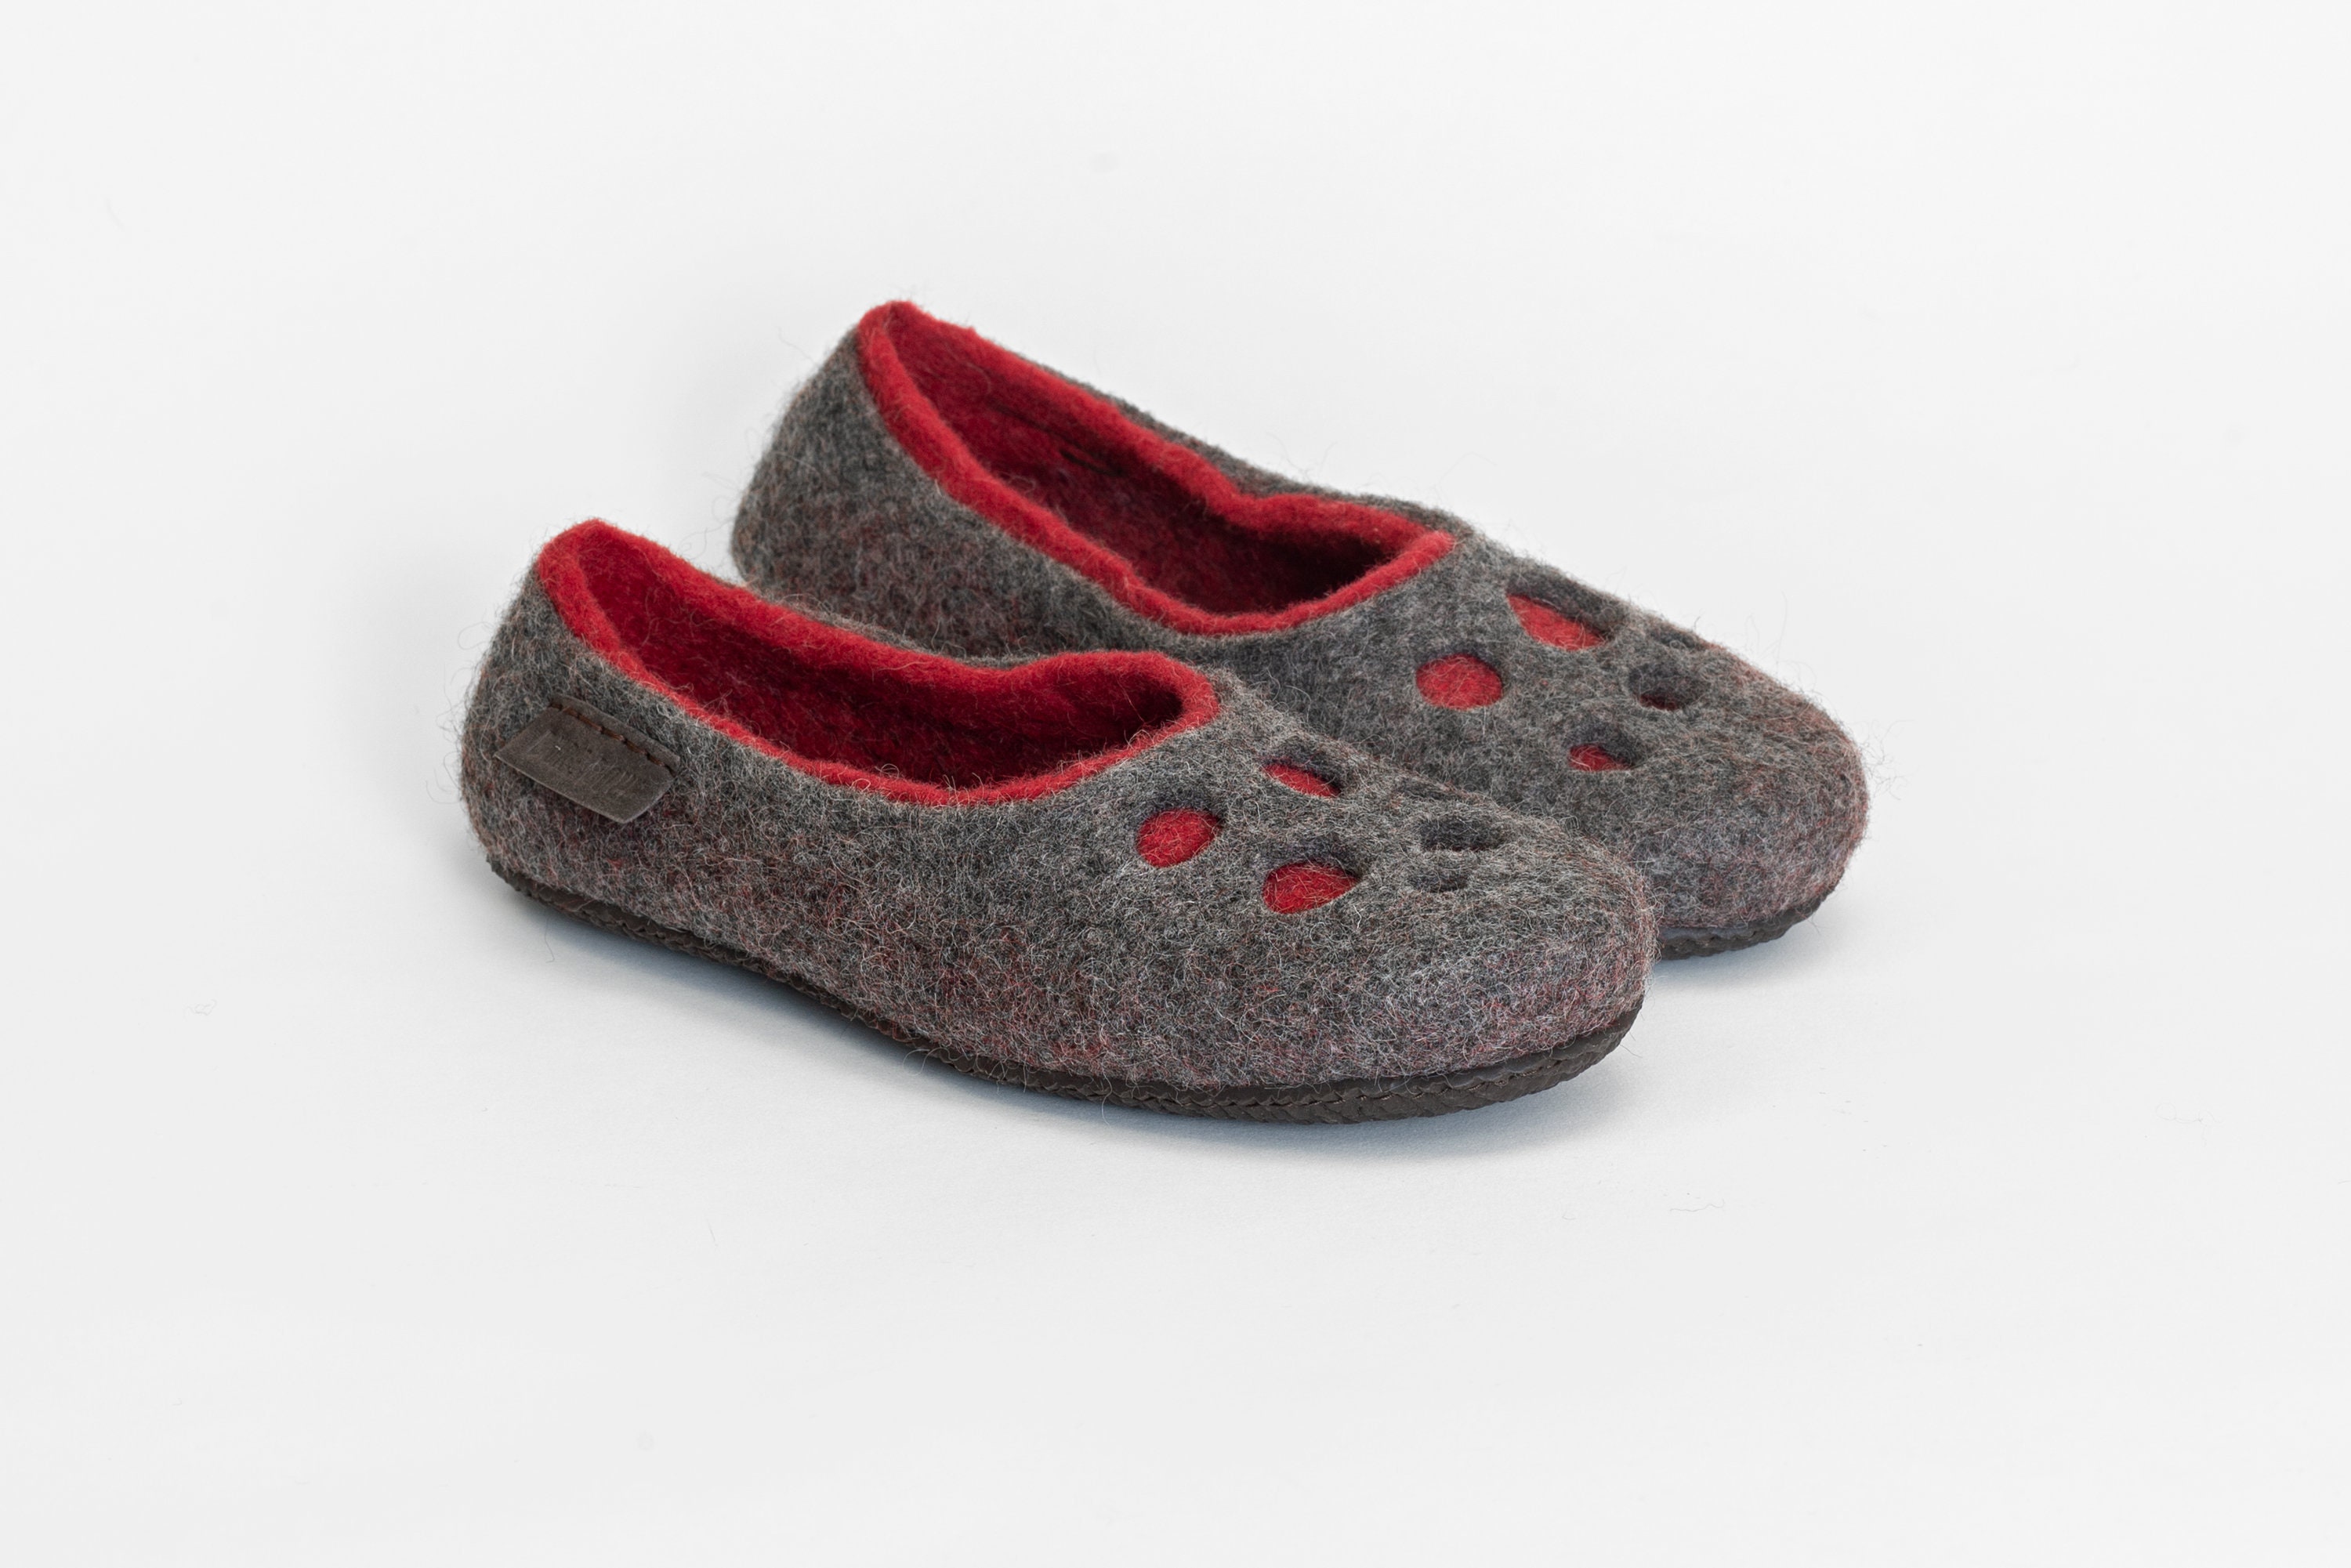 wool shoes for ladies